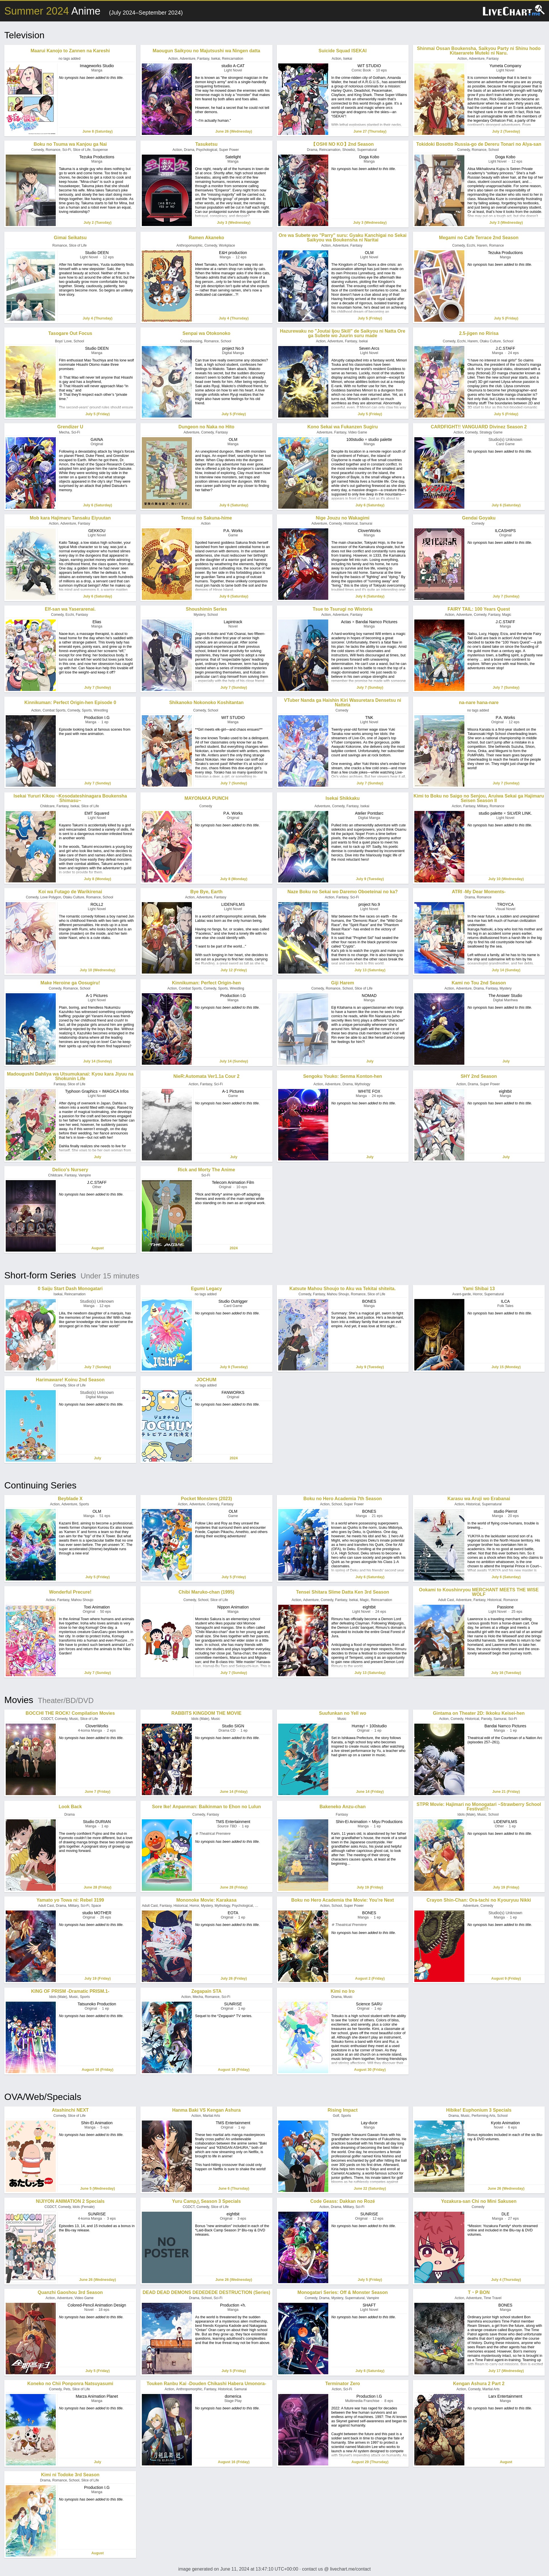 Spring 2019 Anime Chart - Television | LiveChart.me